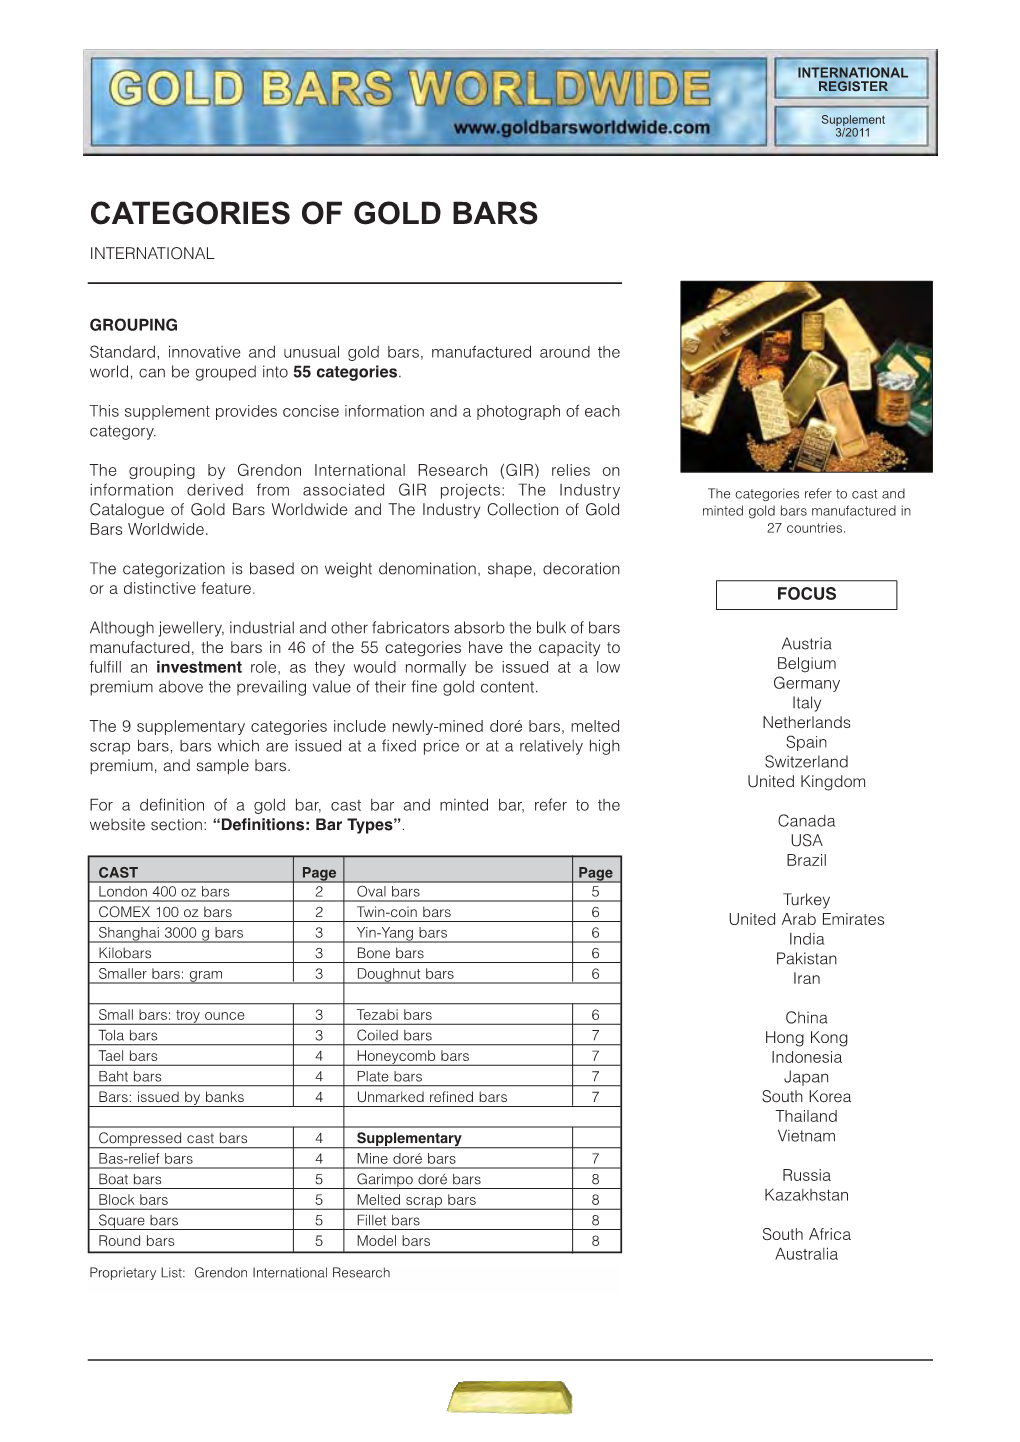 Categories of Gold Bars